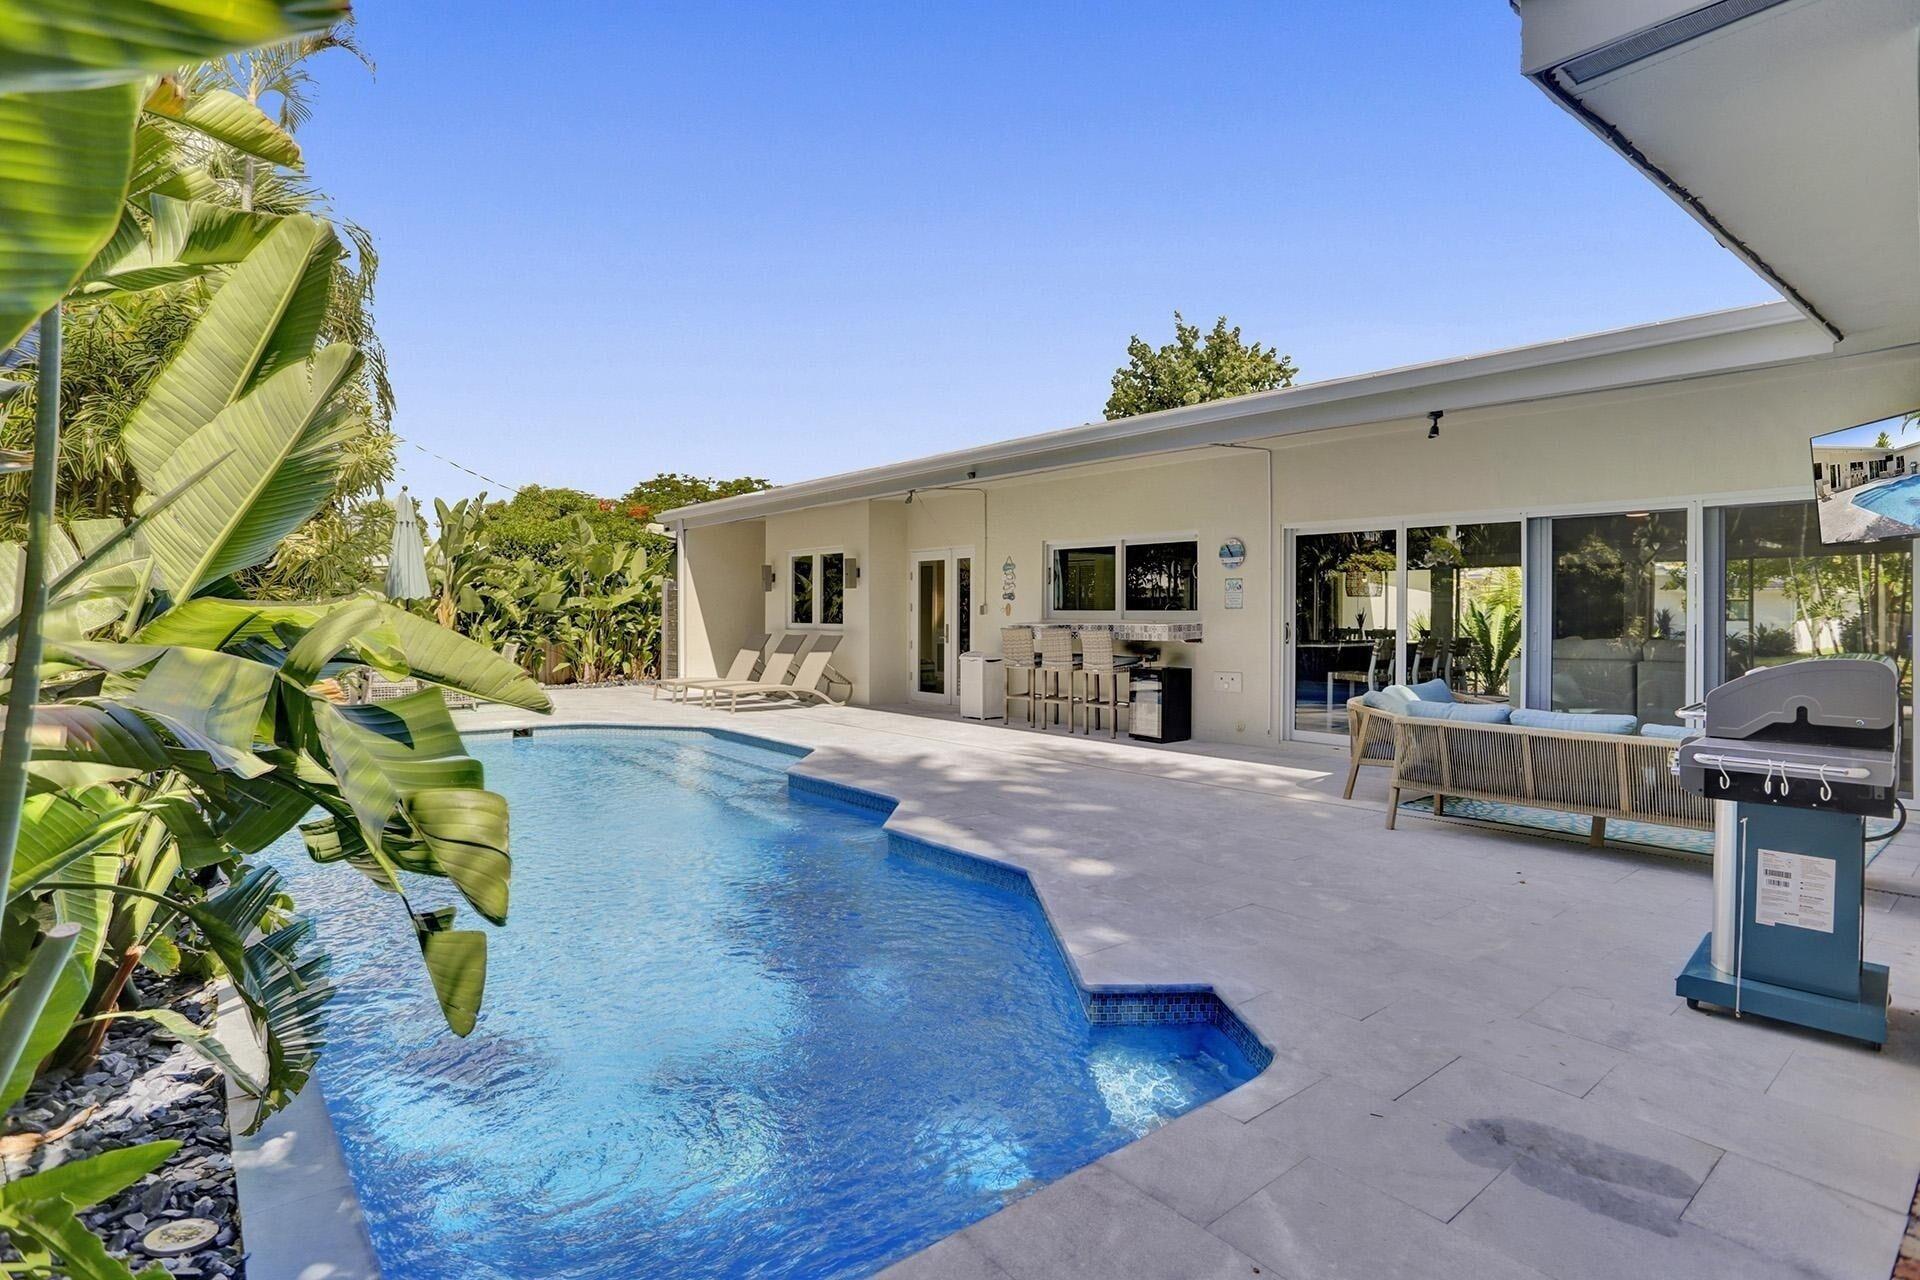 Pool view Ruxtreat! Just A Few Blocks To The Beach With Golf Cart! 4 Bedroom Home